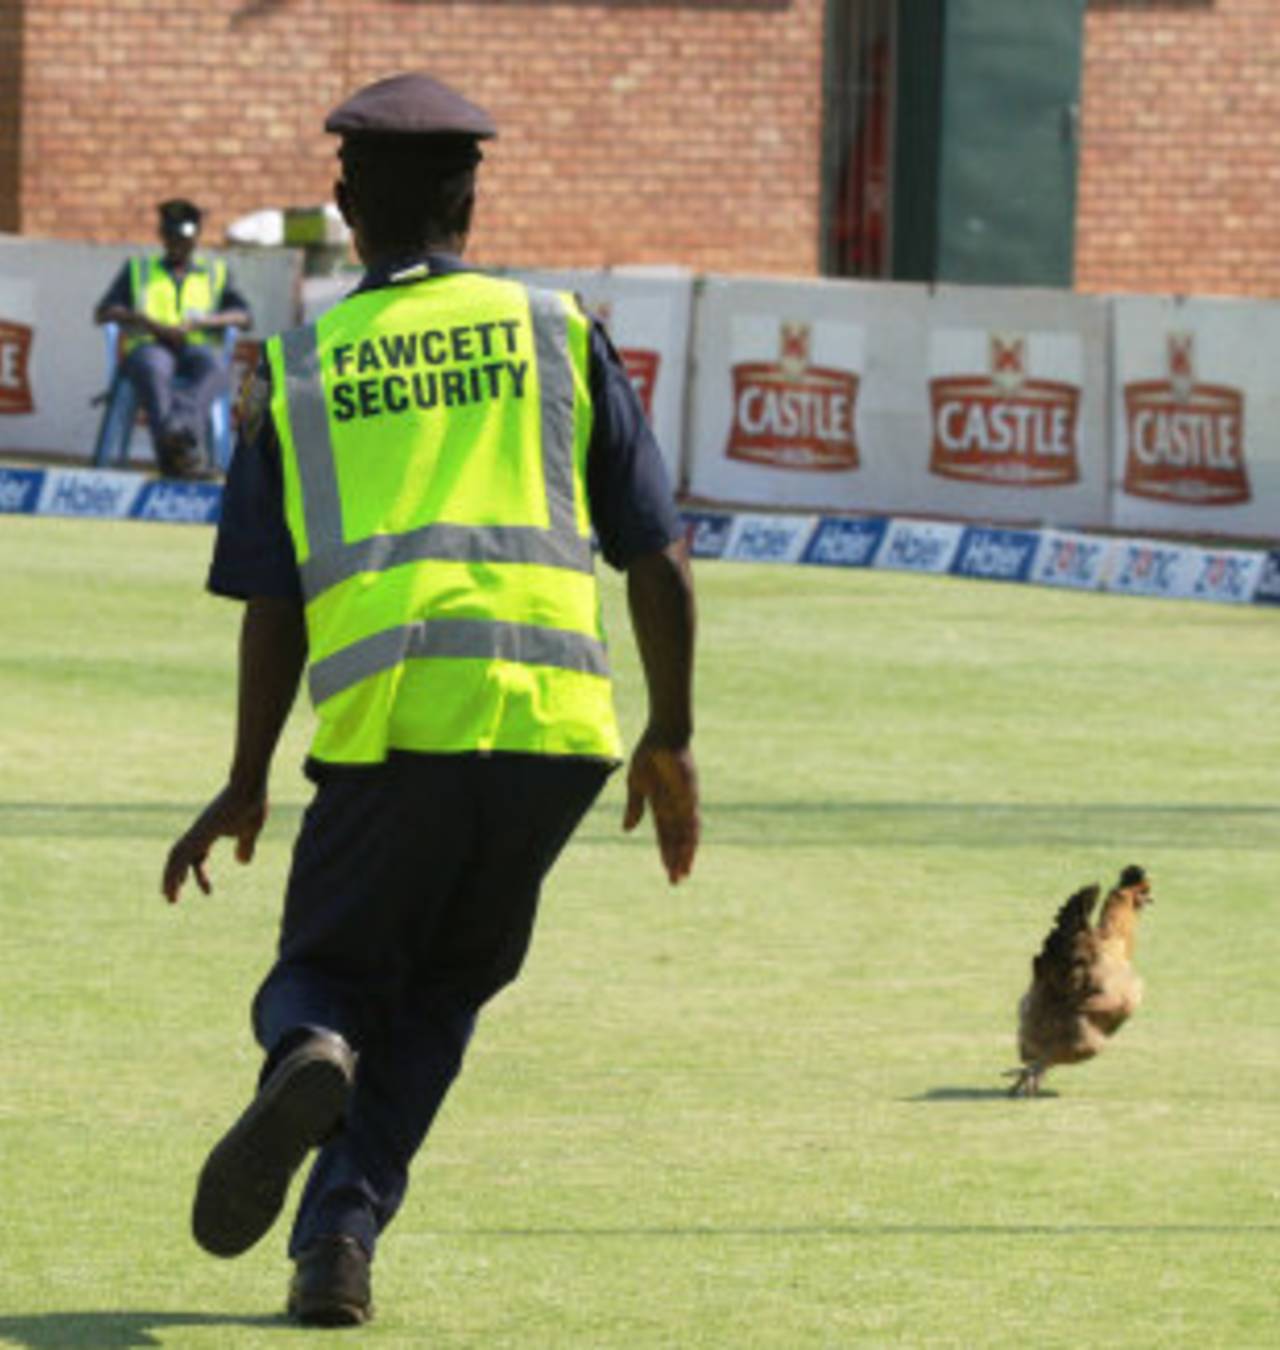 A security guard chases a chicken across the outfield, Zimbabwe v Pakistan, 2nd Test, Harare, 1st day, September 10, 2013